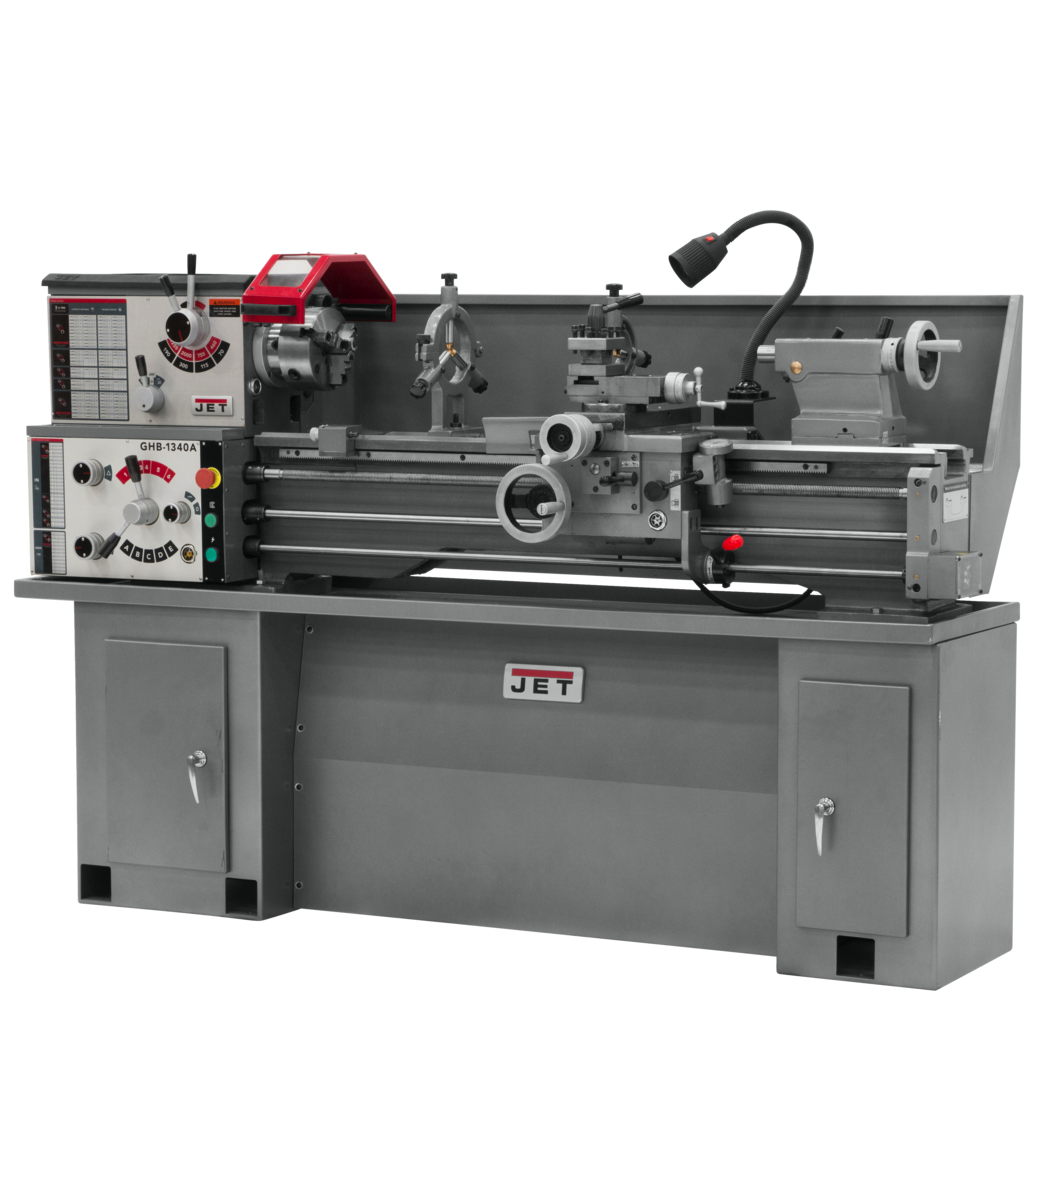 321357A, GHB-1340A, GHB-1340A, 13" Swing 40" Centers, 2HP, 1Ph, 230V only, Jet, Metalworking, Turning, Lathes